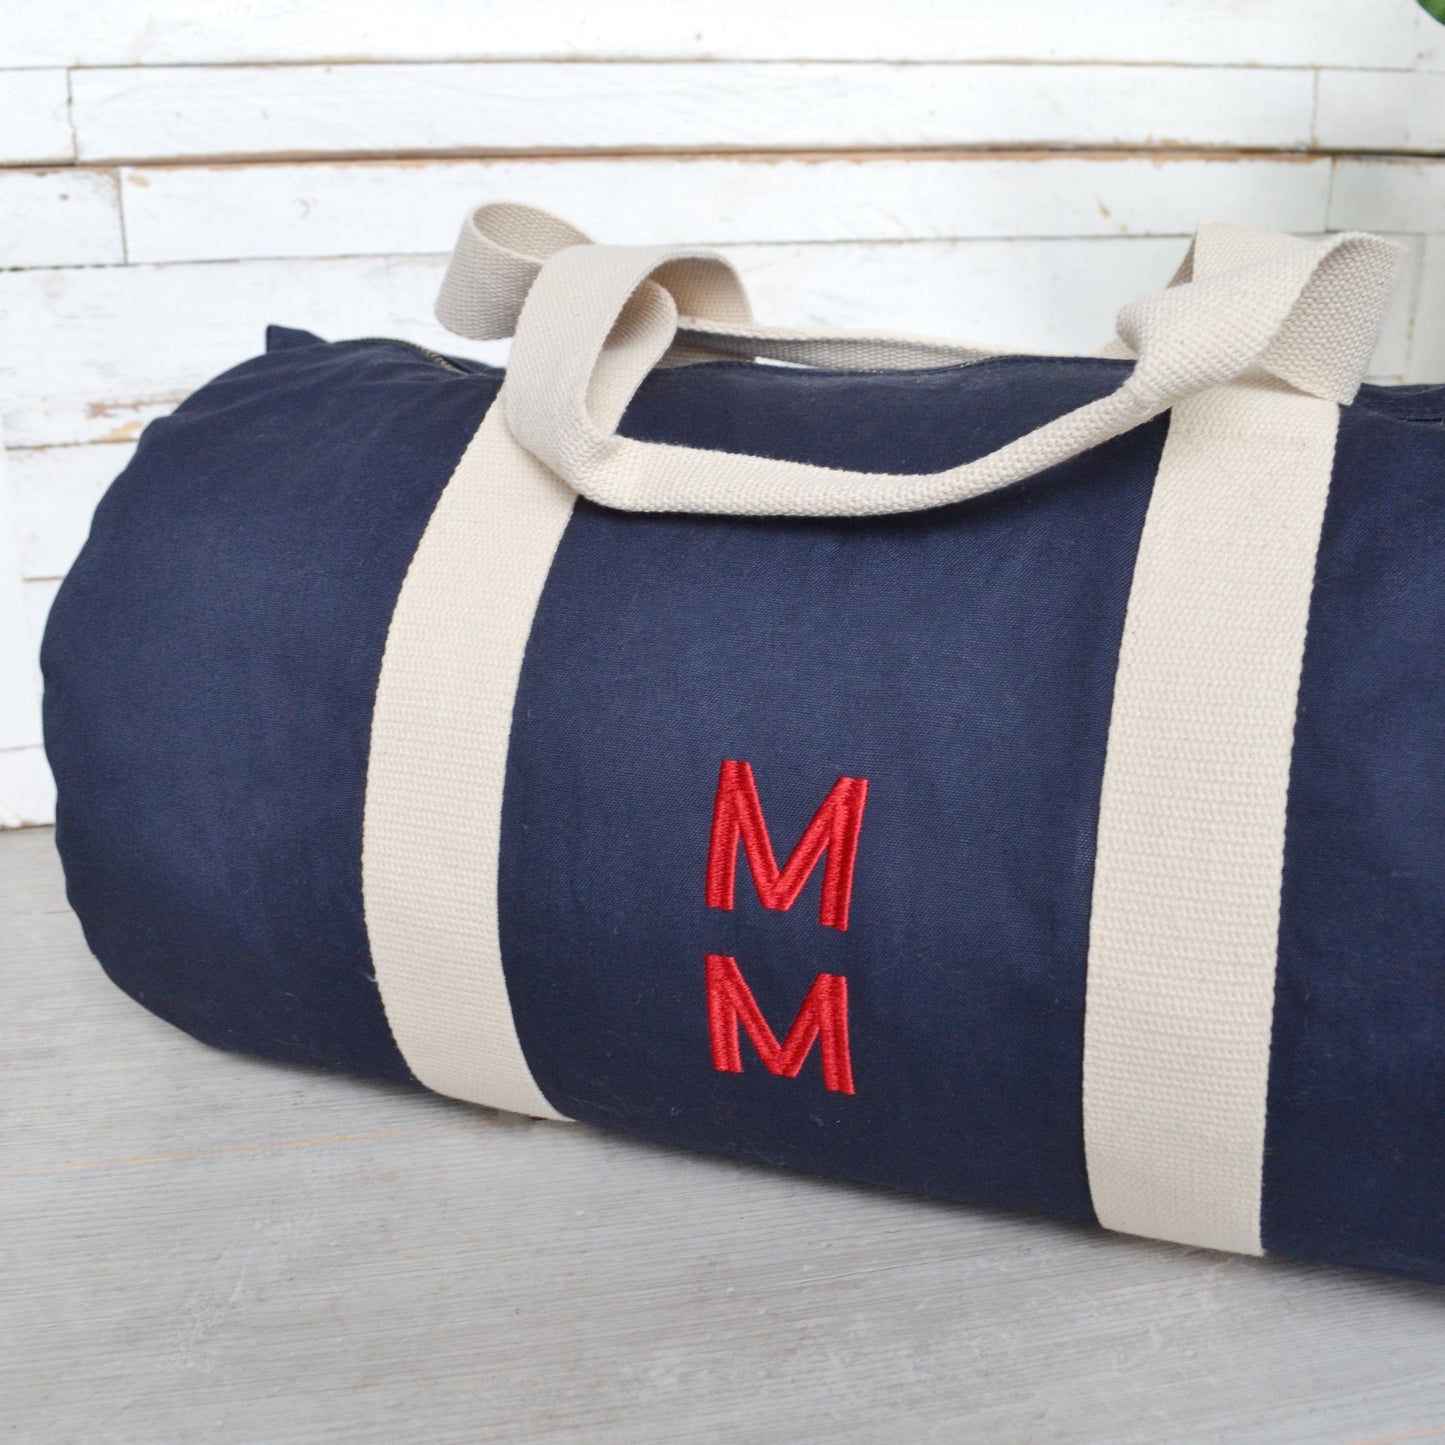 Men's Embroidered Duffle Bag